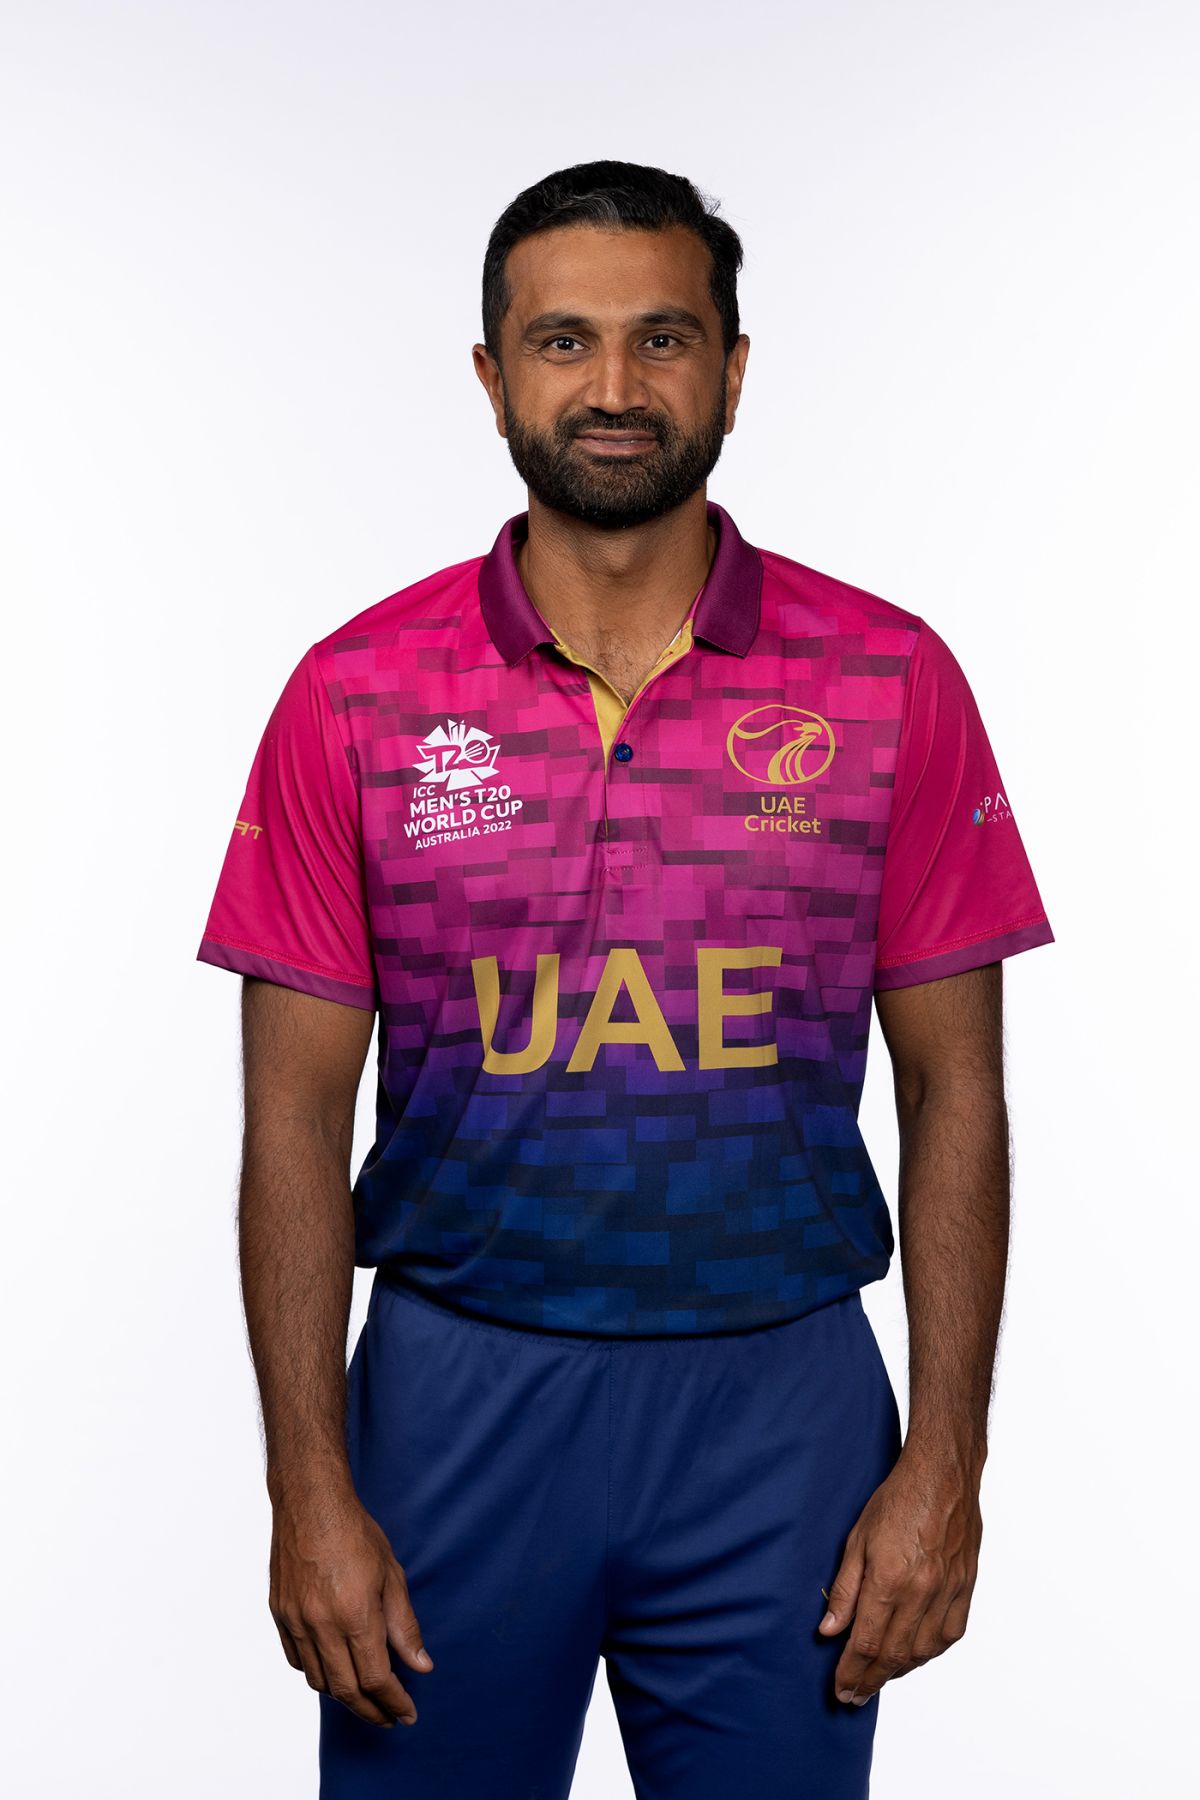 The Sri Lanka Cricket Jersey for the ICC Men's T20 World Cup is